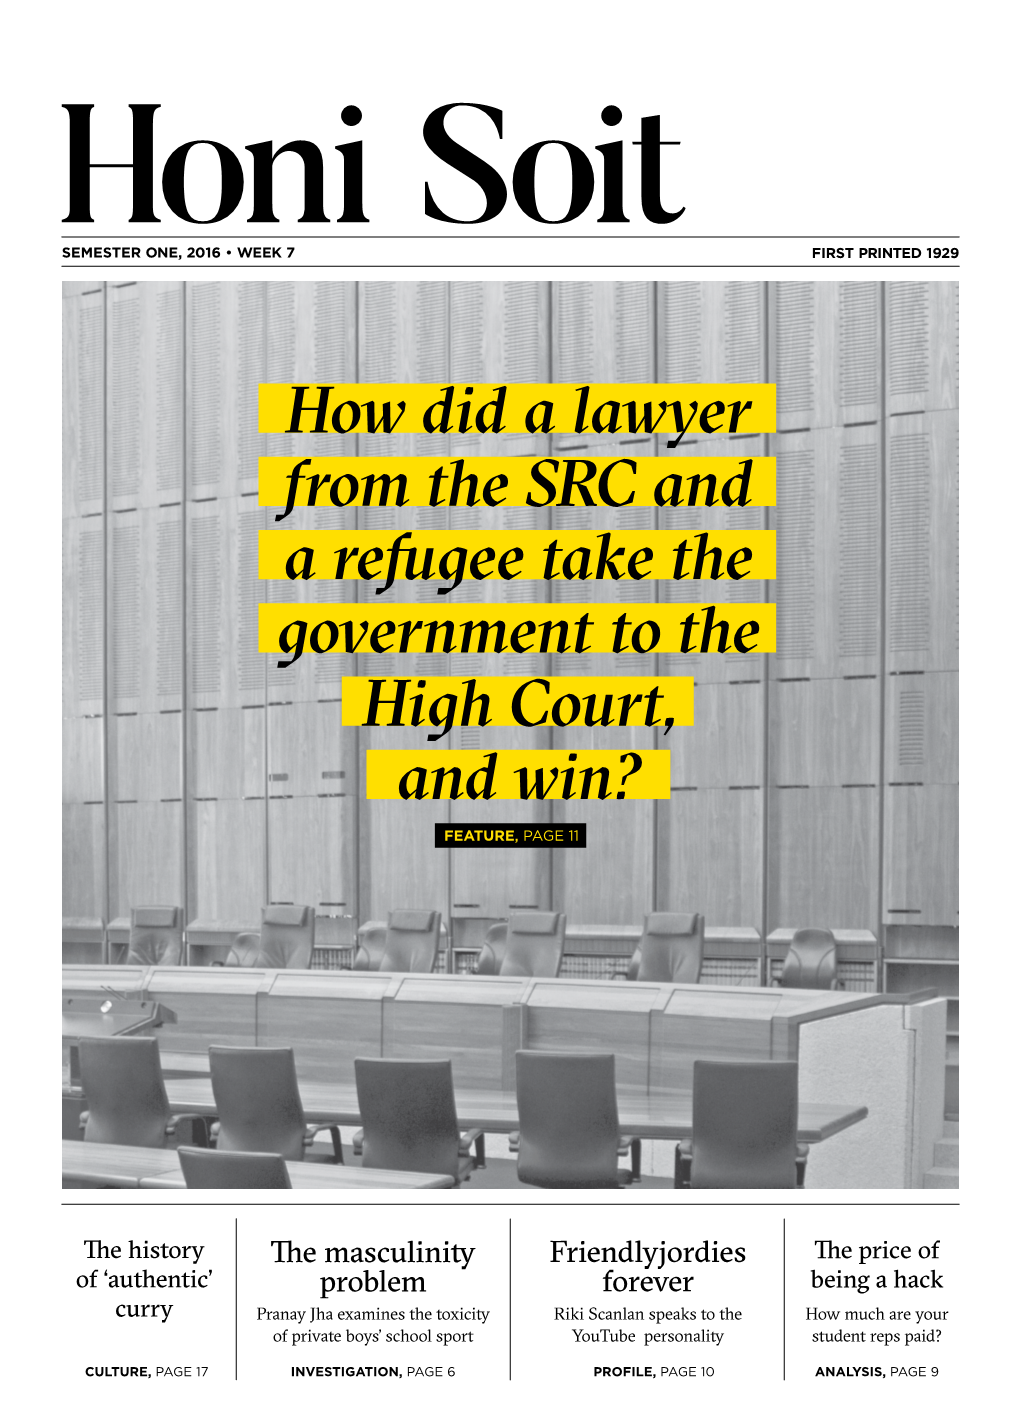 How Did a Lawyer from the SRC and a Refugee Take the Government to the High Court, and Win? FEATURE, PAGE 11